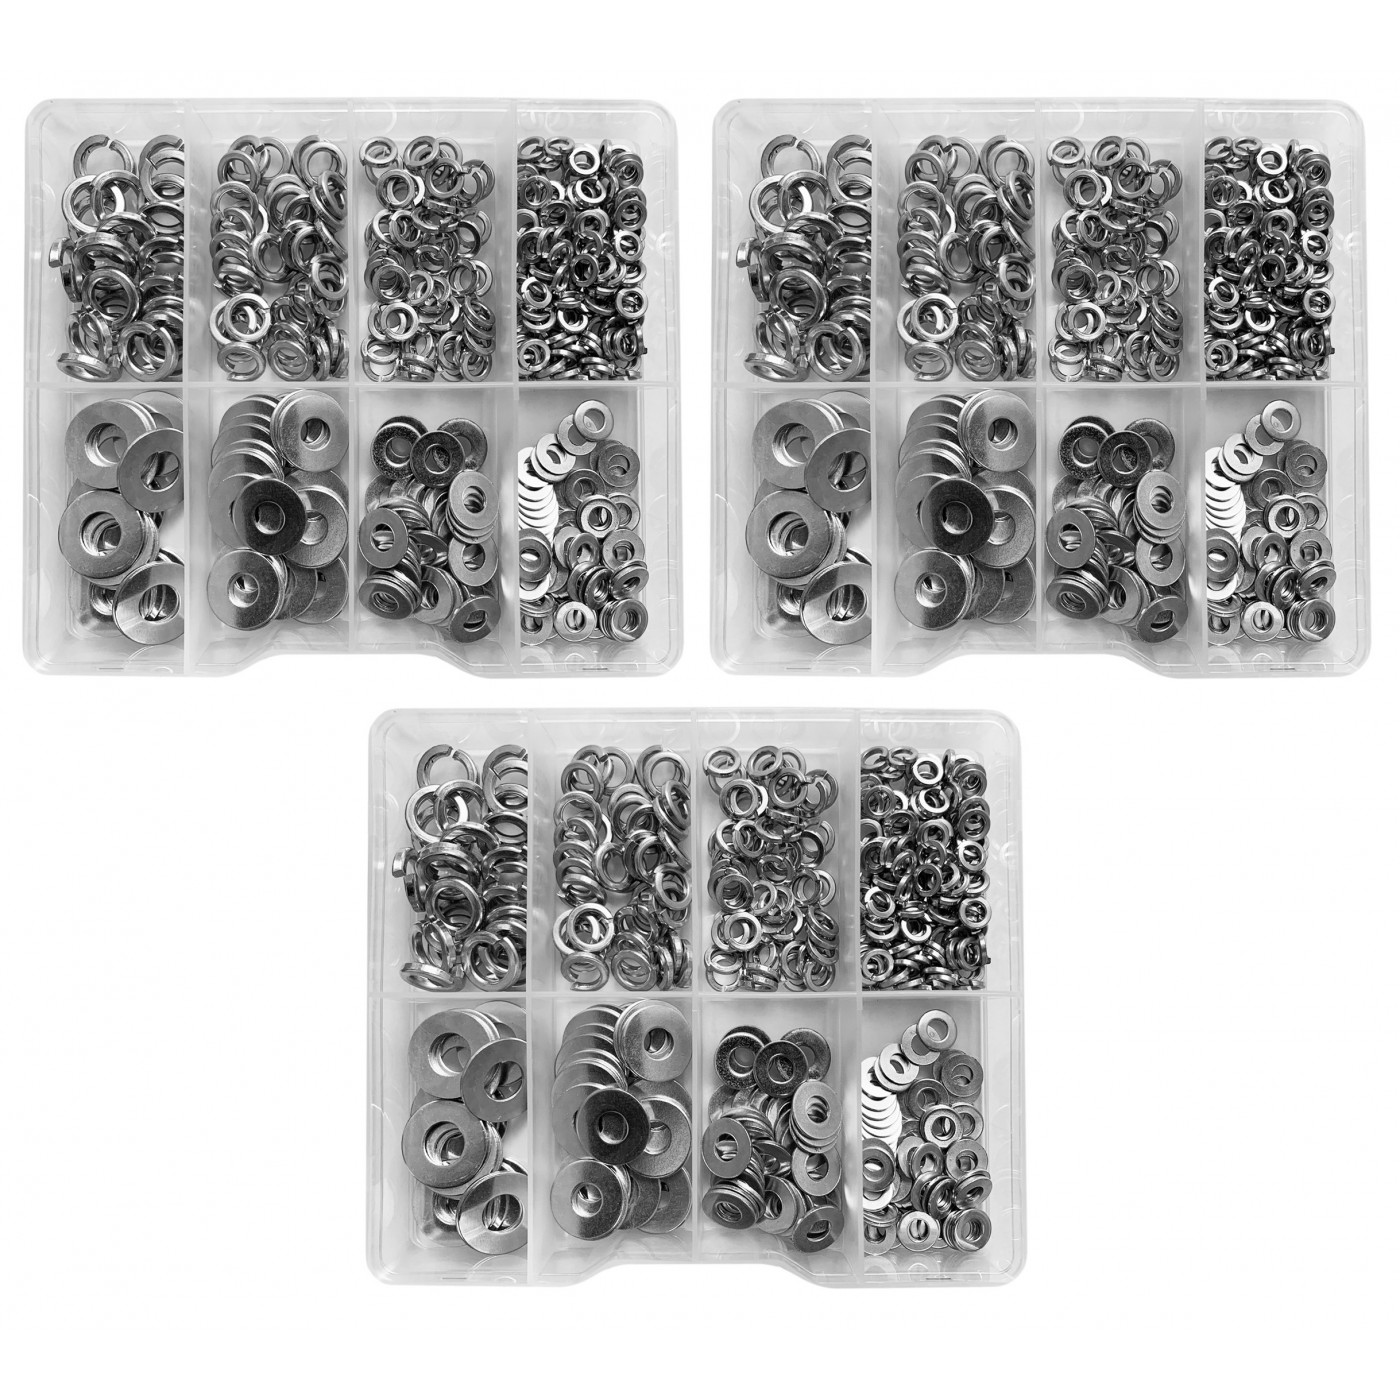 Set of 1125 washers in plastic assortment boxes